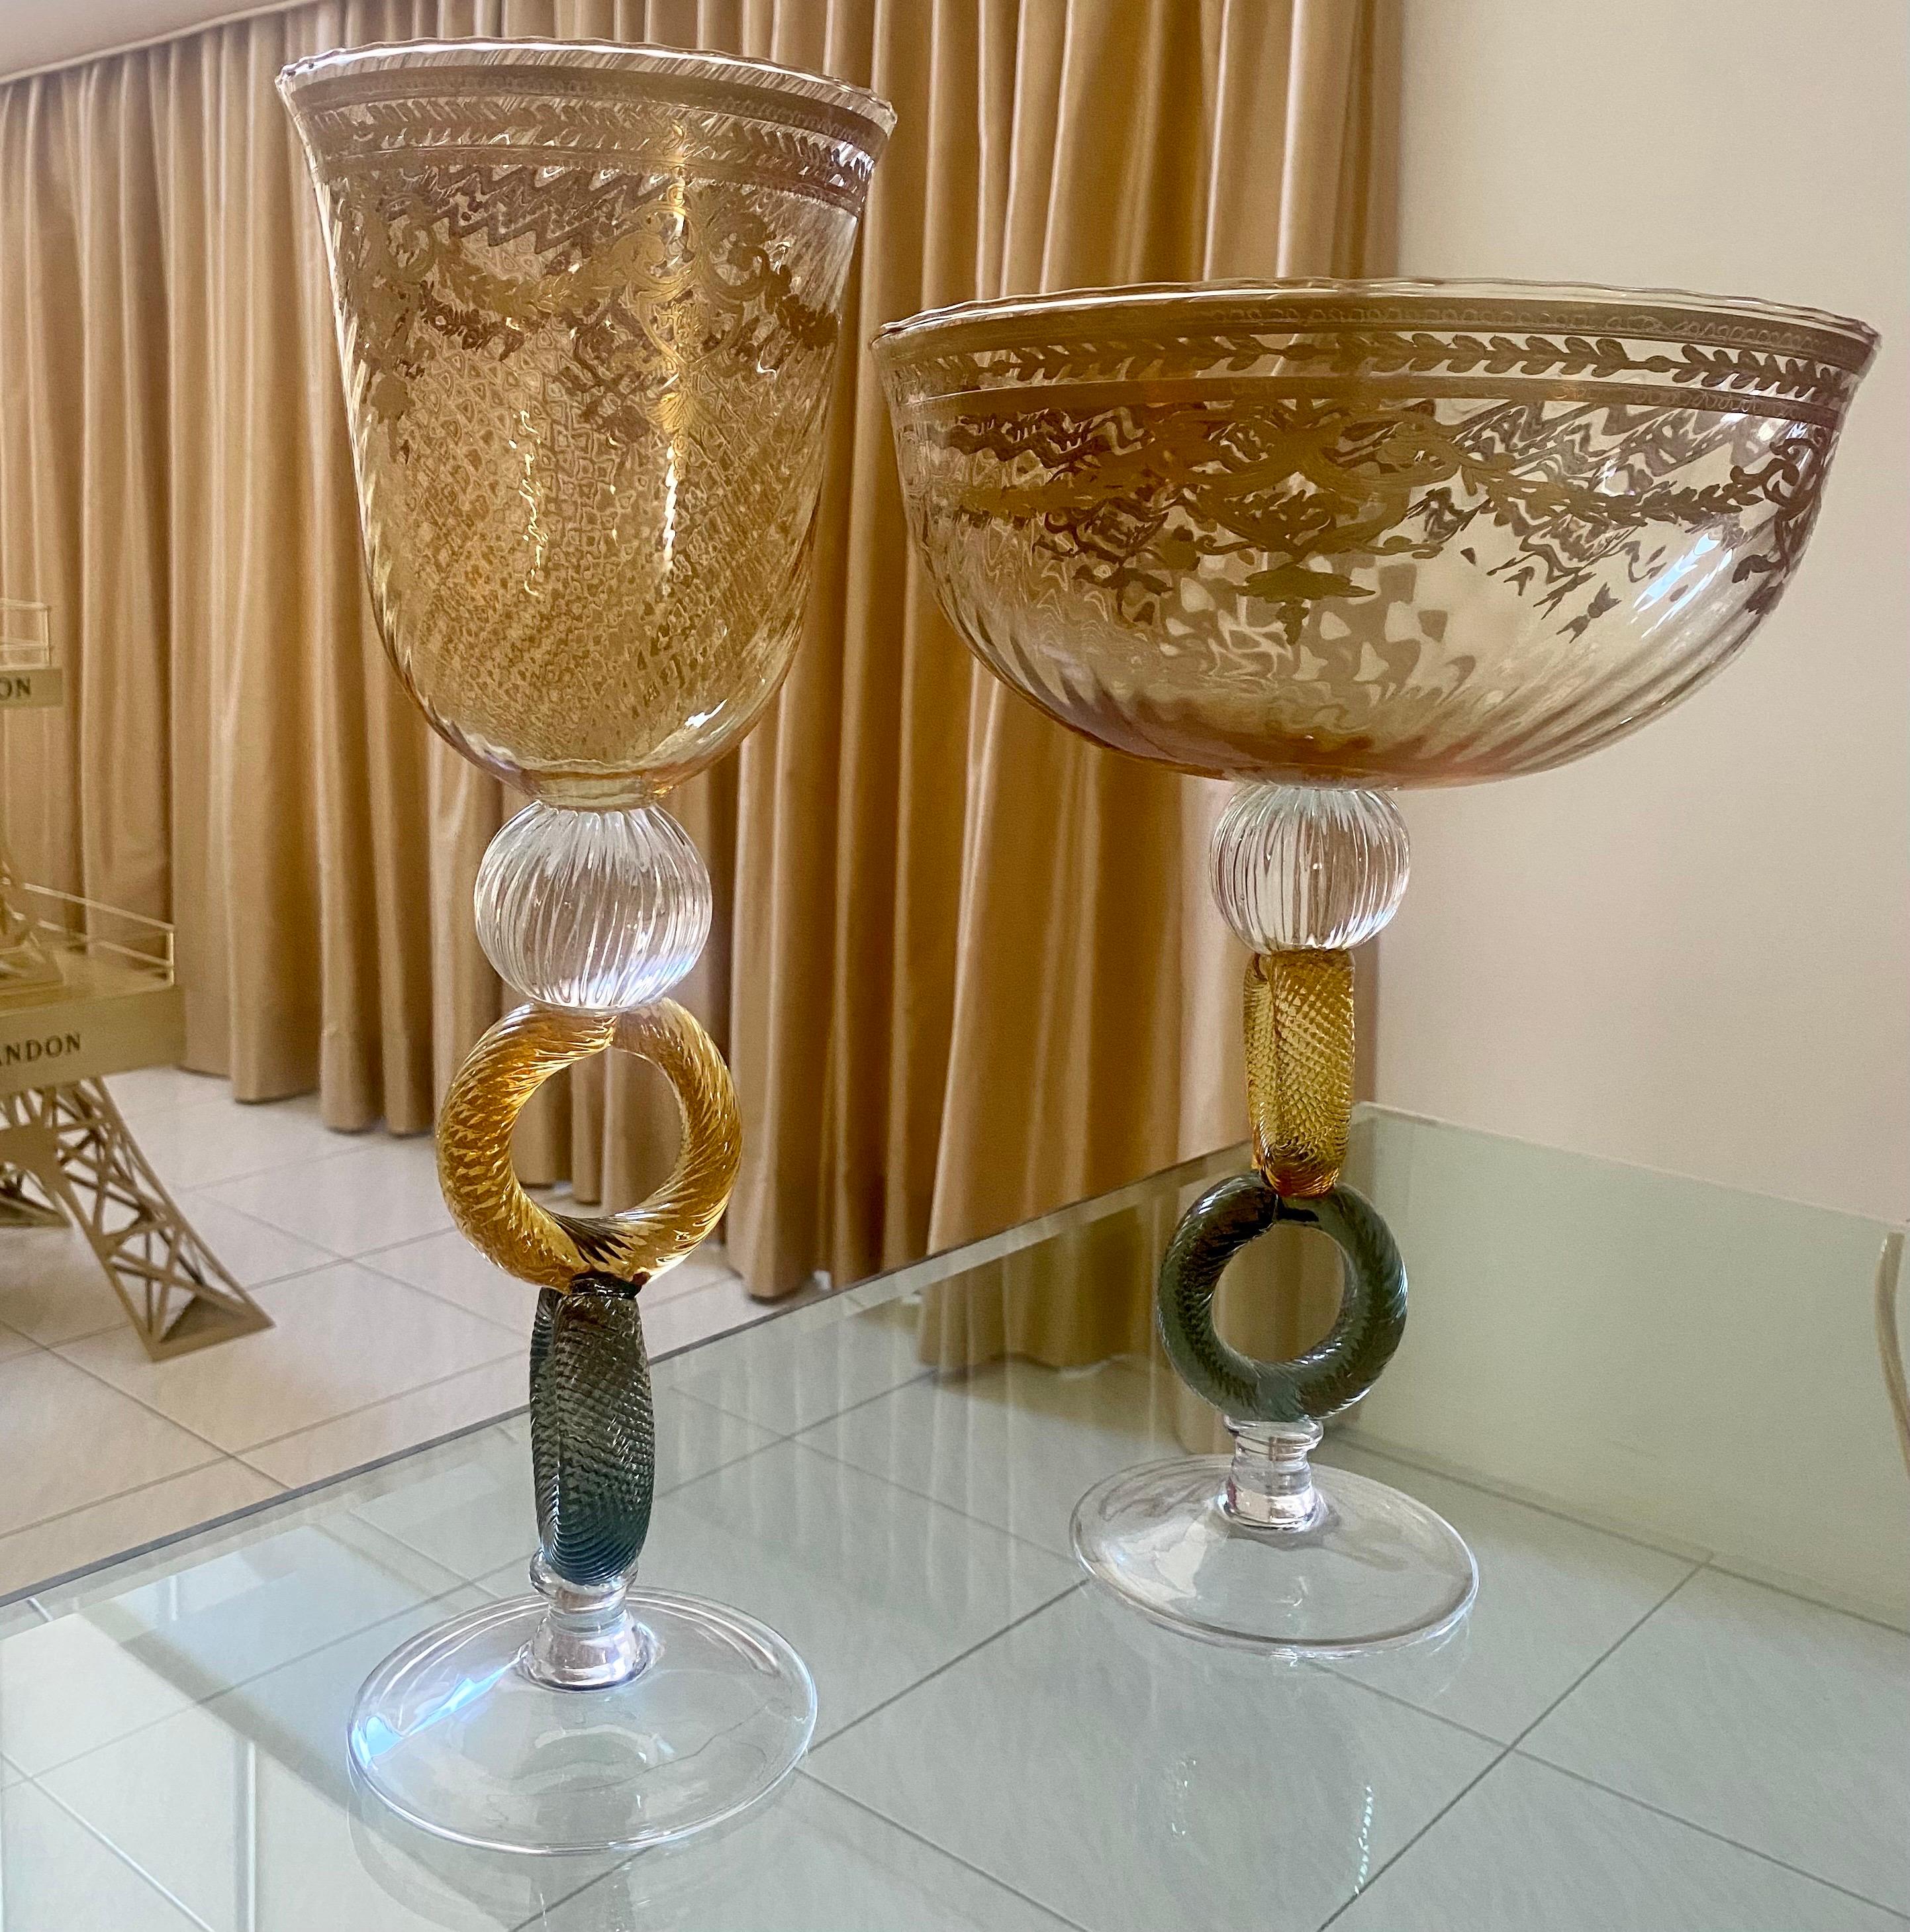 Pair of beautiful Salviati style Venetian glass art coupes, blown glass and etched glass. These decorative vessels are in great condition and of very fine quality.
Taller vessel is 15.5 inches tall and 5.5 inches in diameter.
The larger vessel is